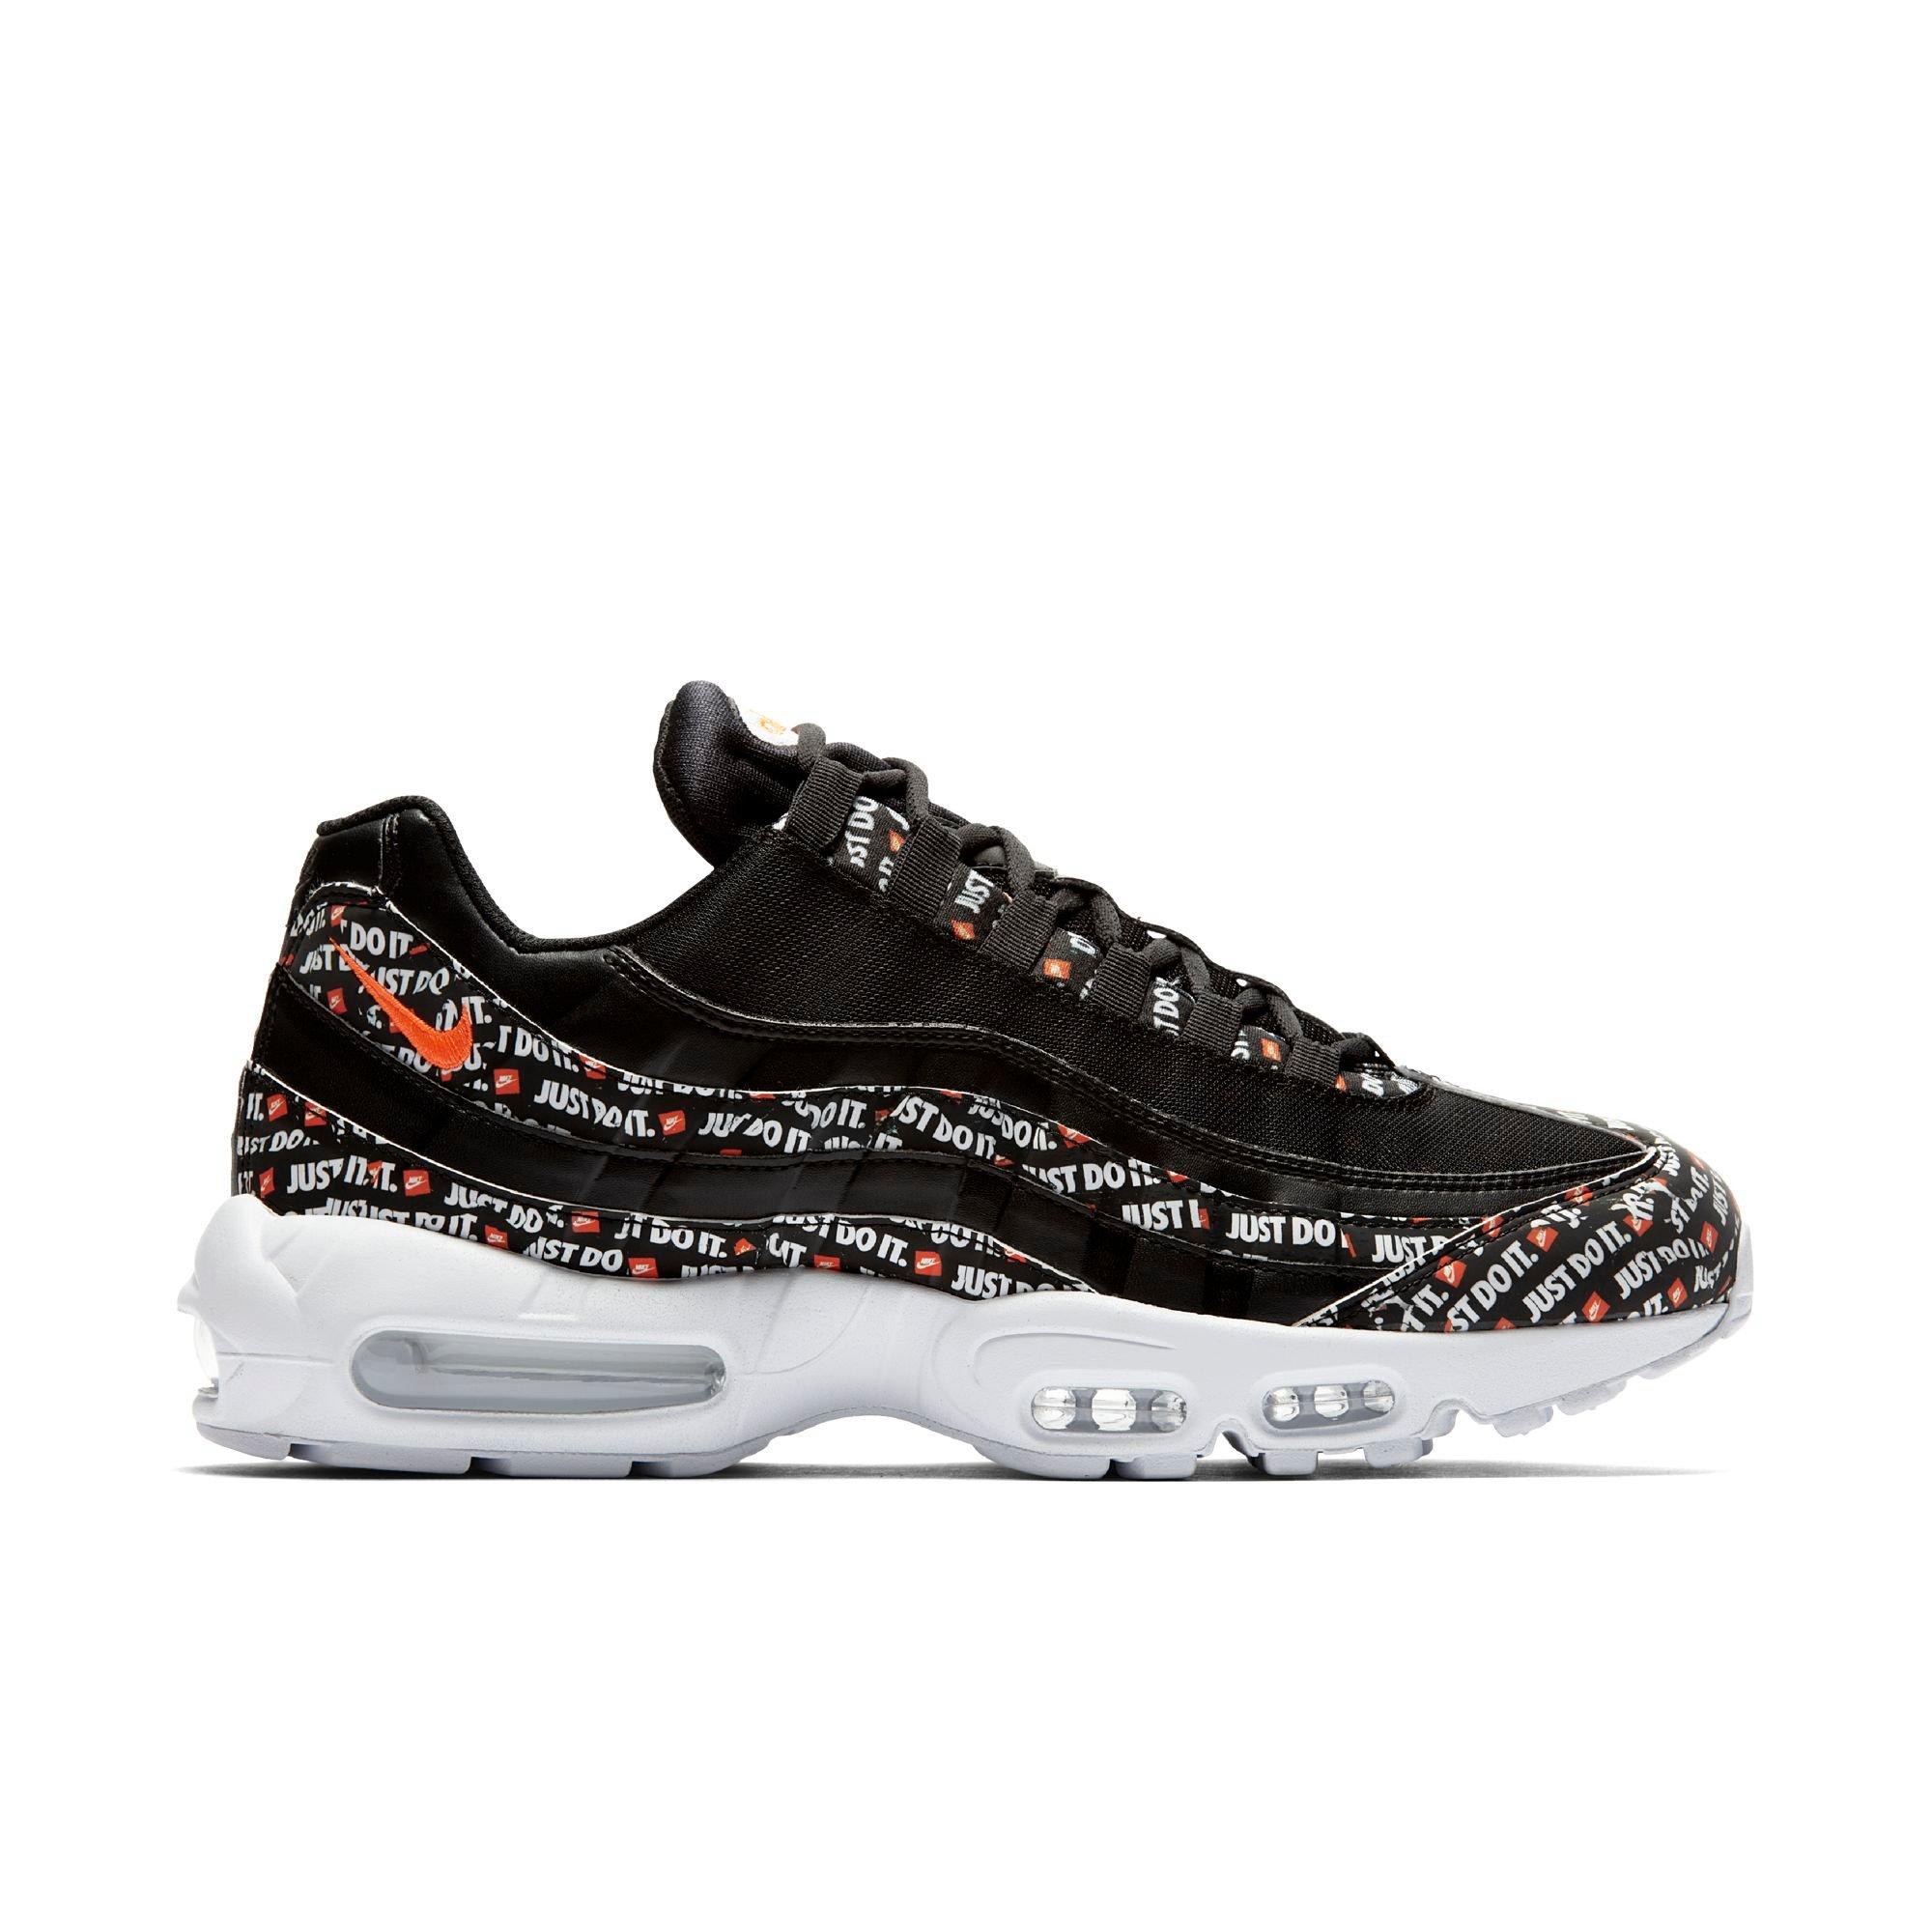 air max 95 just do it